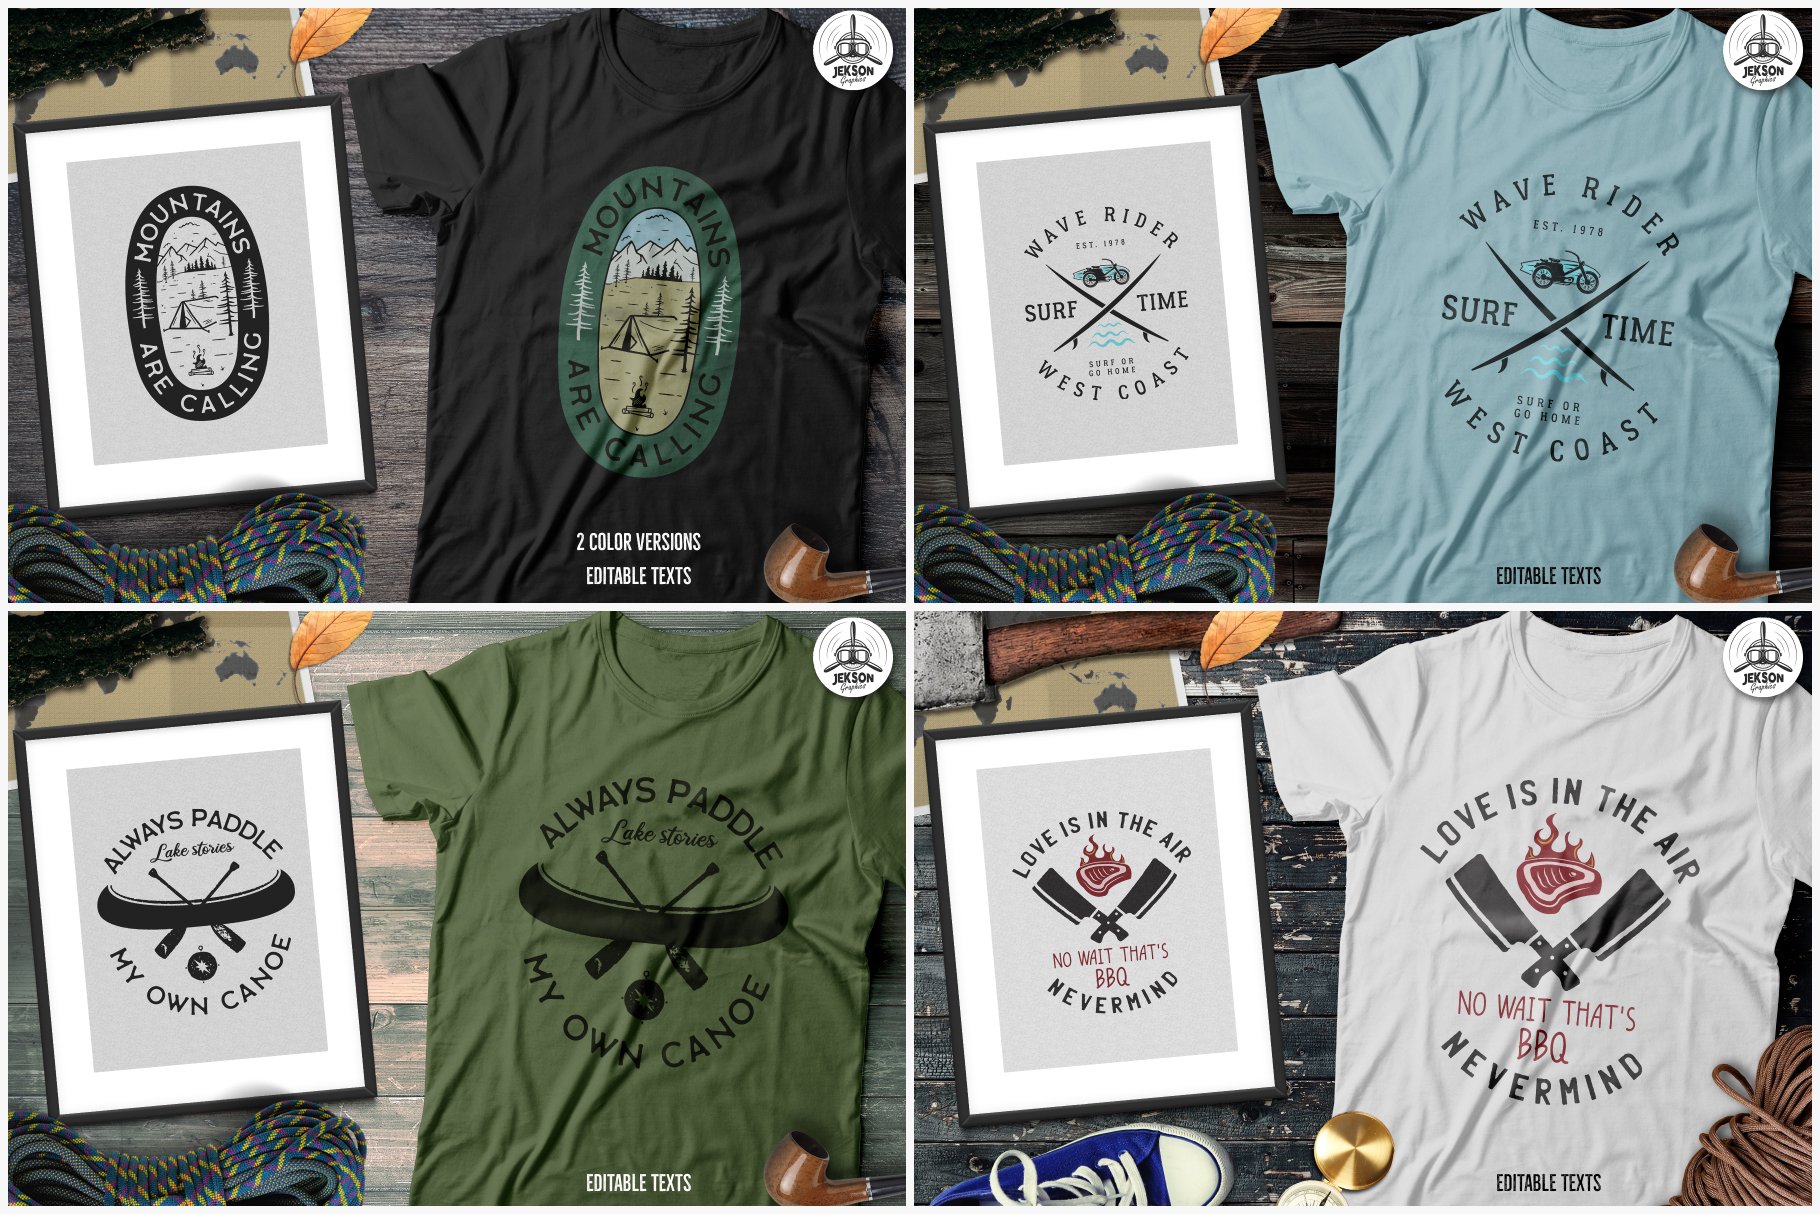 Classic t-shirts with different illustrations.